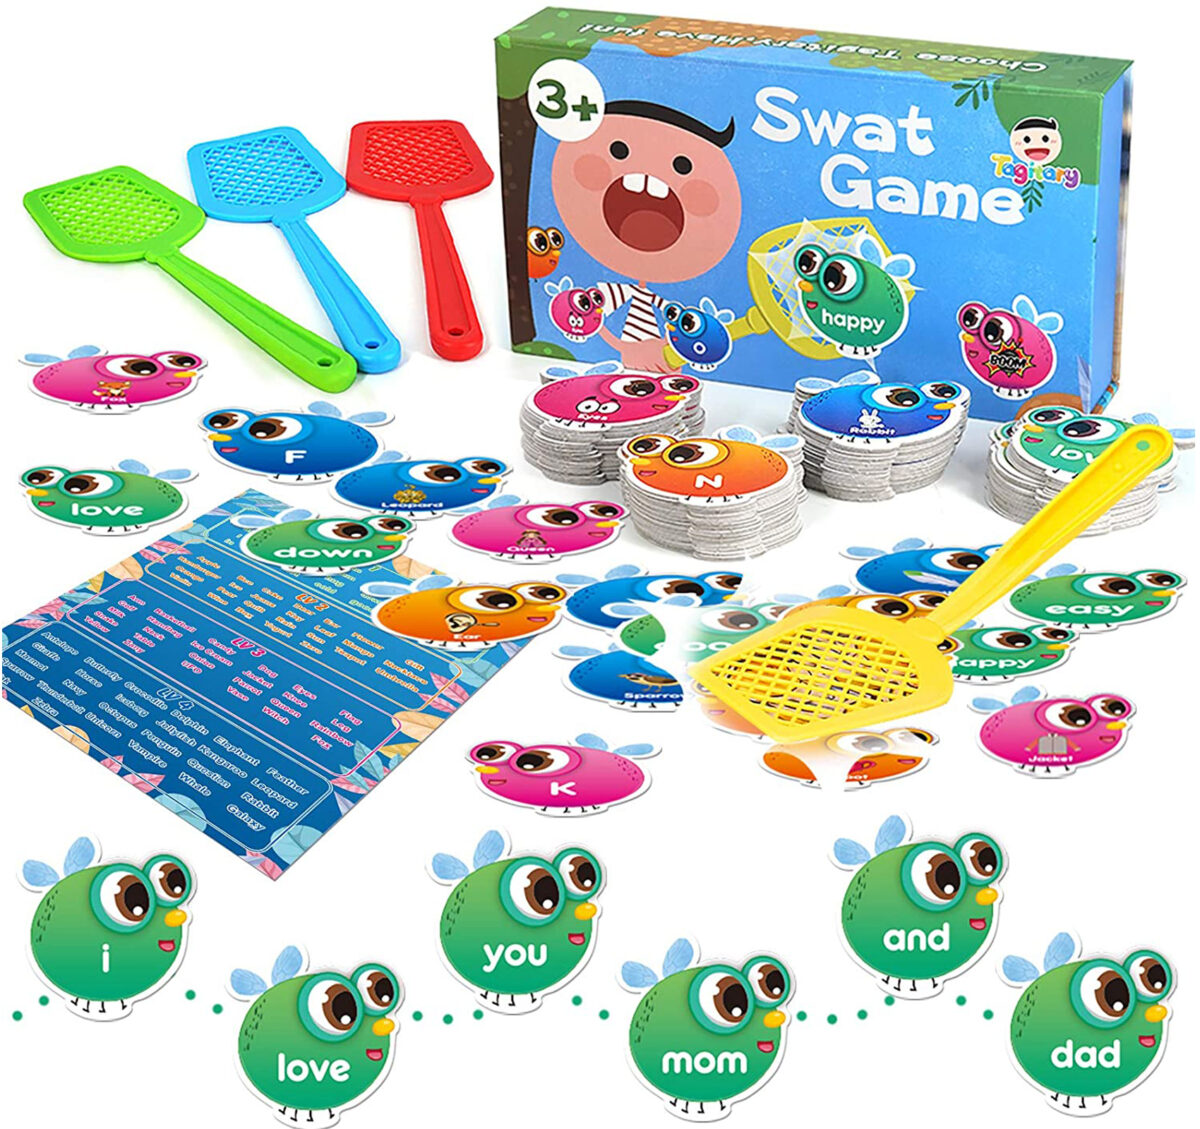 SWAT Game is to learn basic reading skills such as alphabet and sight words.